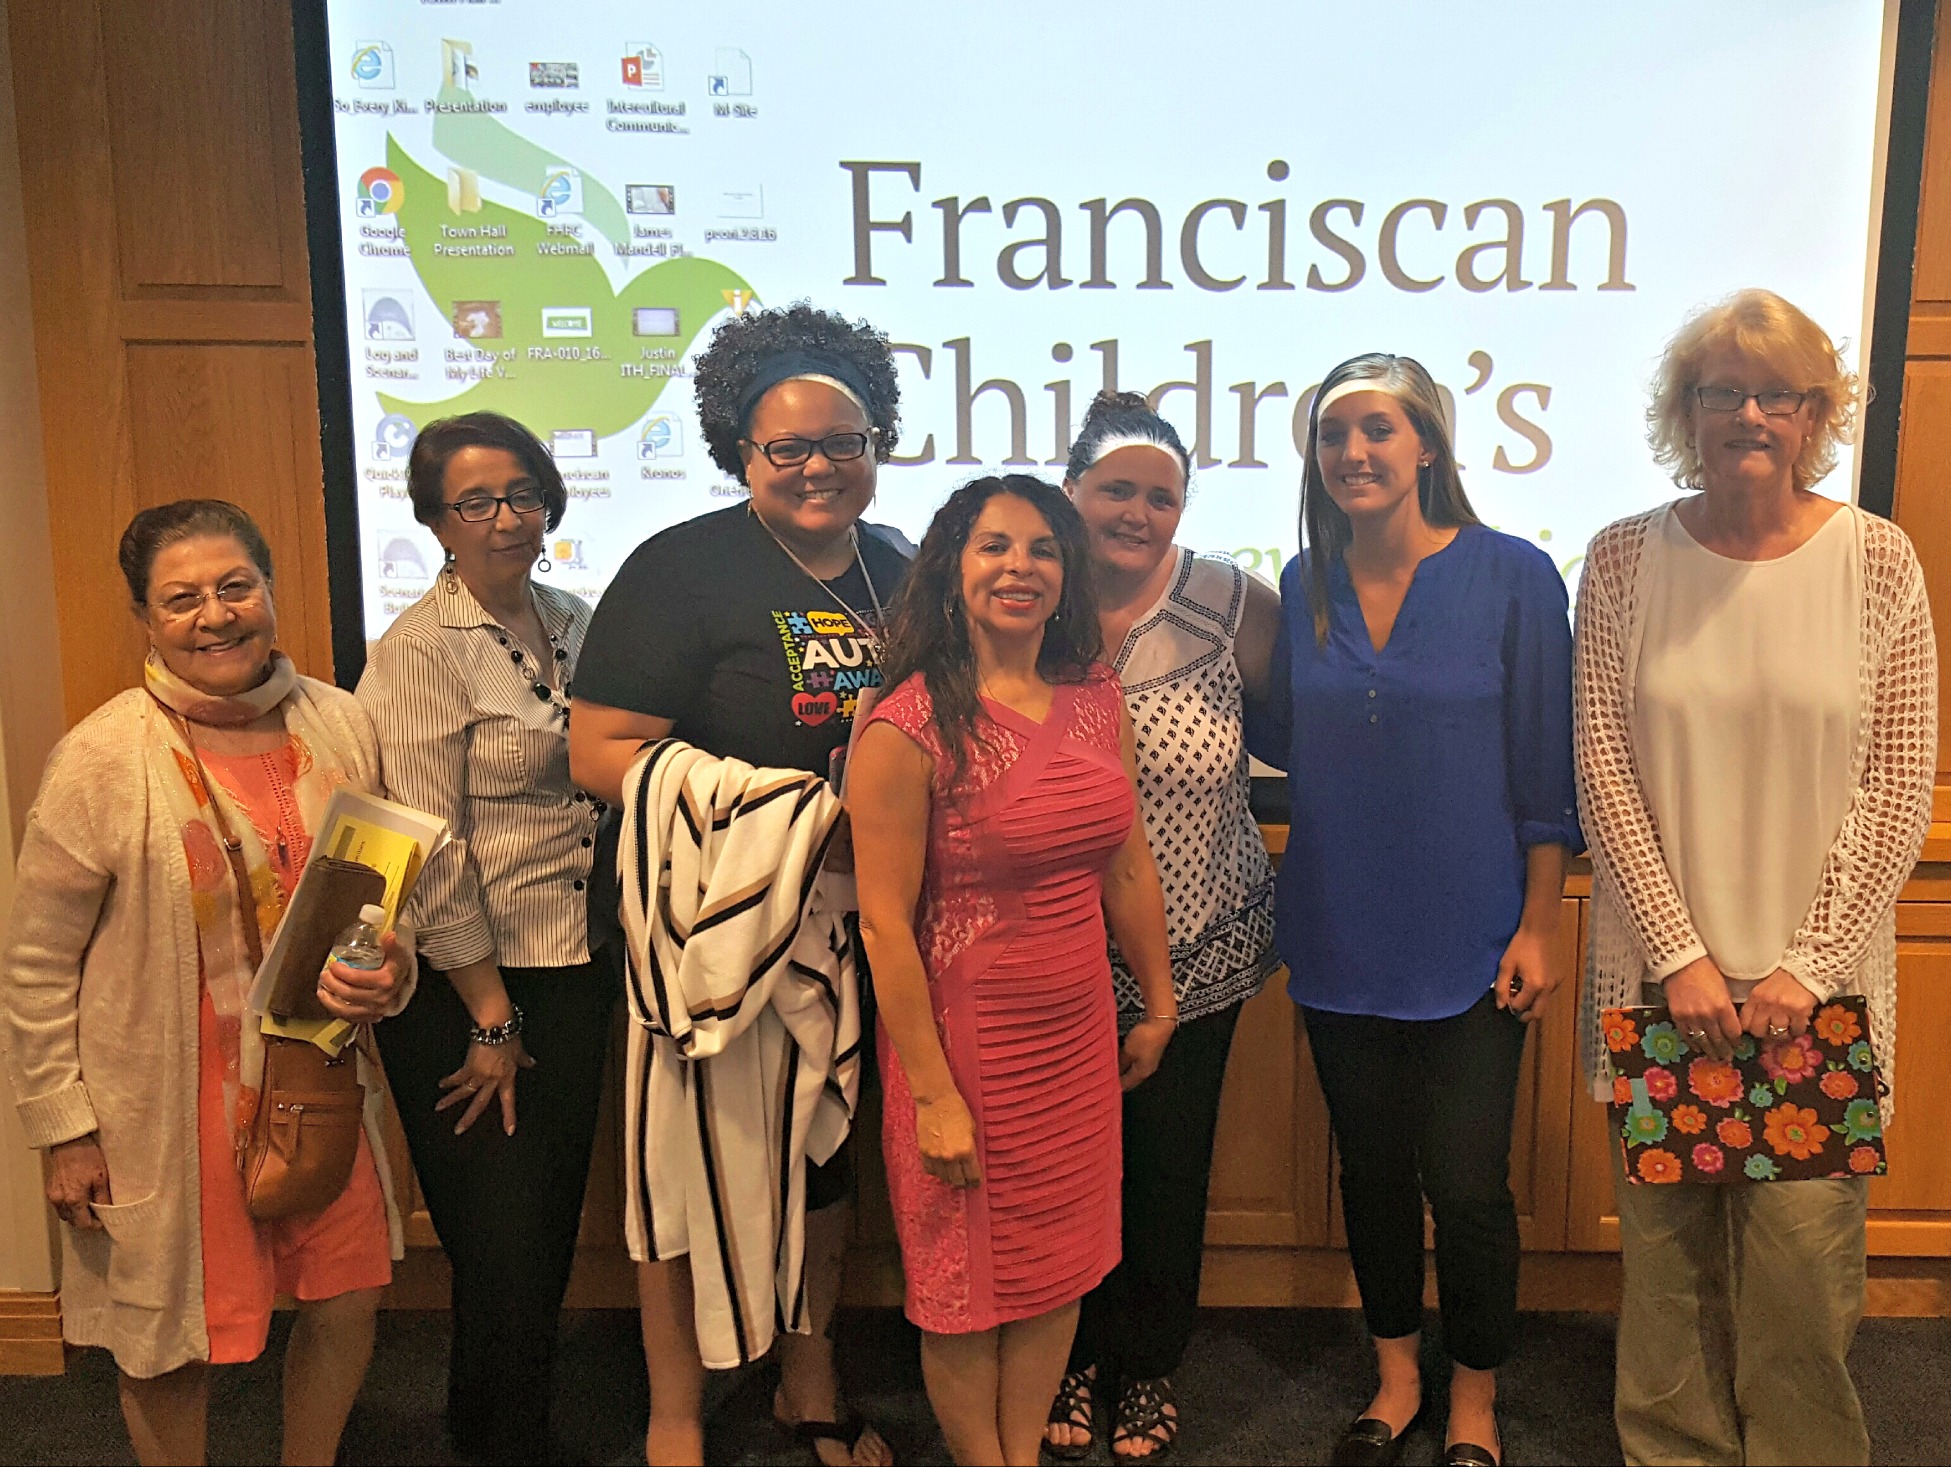 Attendees from the recent PPAL training at Franciscan Children’s